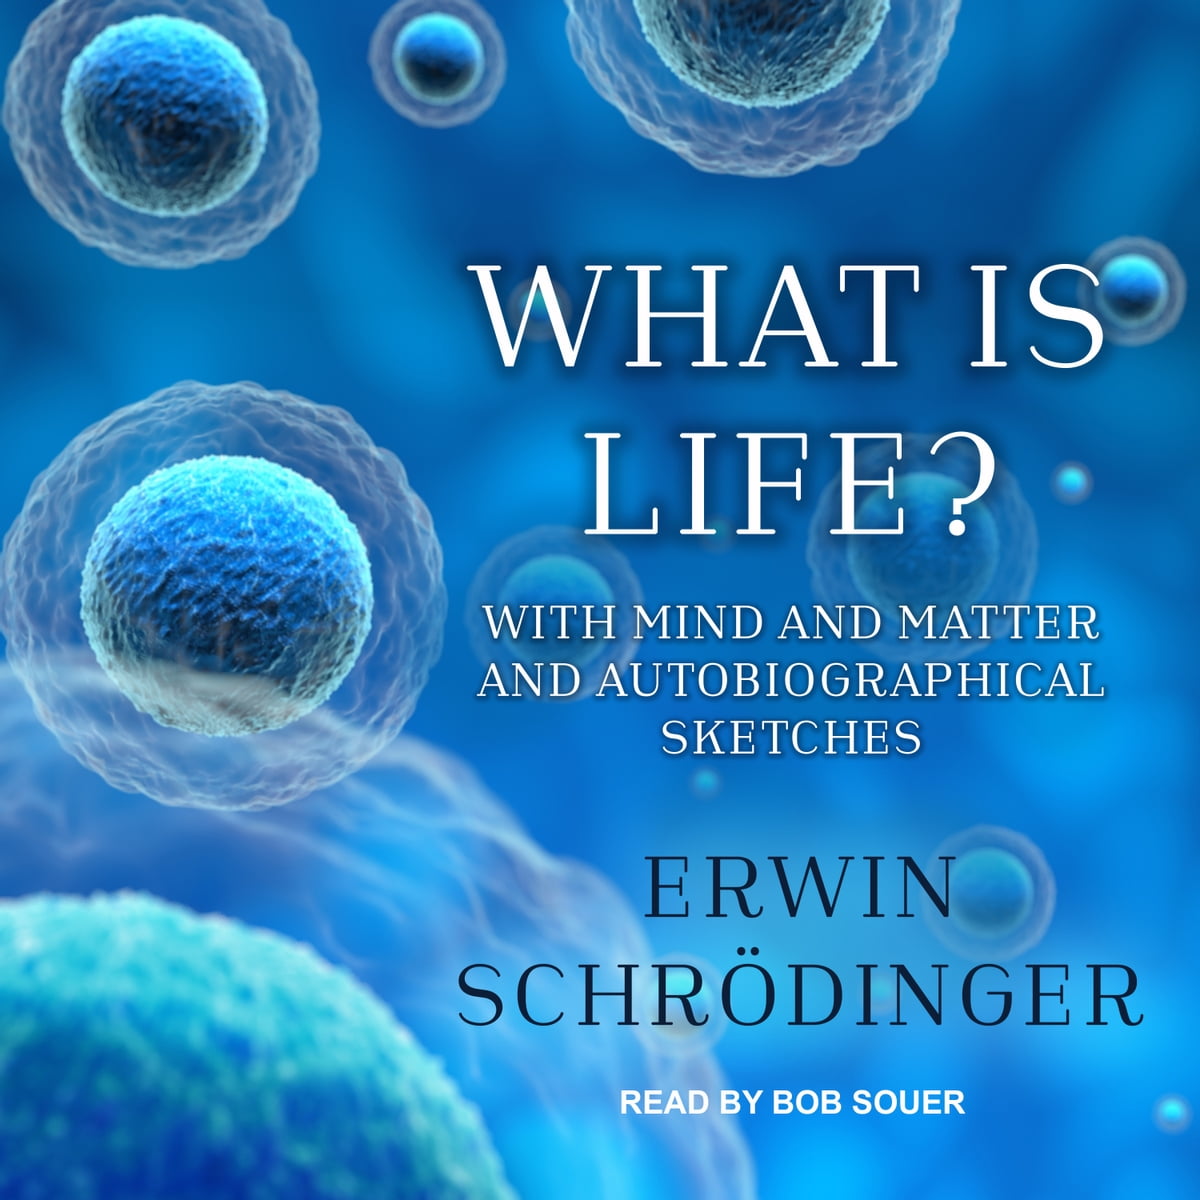 erwin-schrodinger-what-is-life-ebook